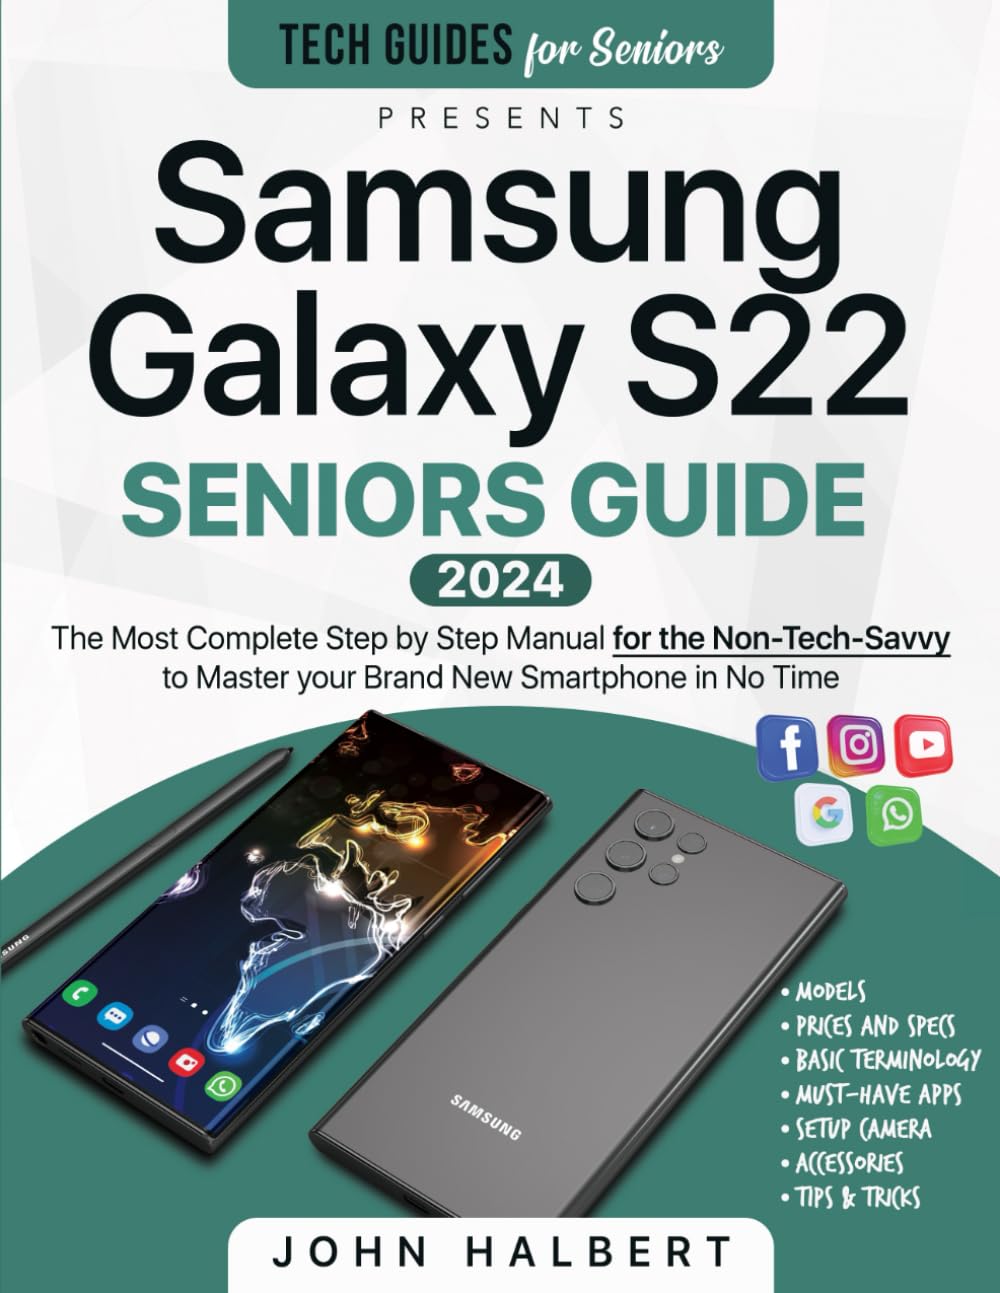 Samsung Galaxy S22 Seniors Guide: The Most Complete Step-by-Step Manual for the Non-Tech-Savvy to Master your Brand New Smartphone in No Time (Tech guides for Seniors)